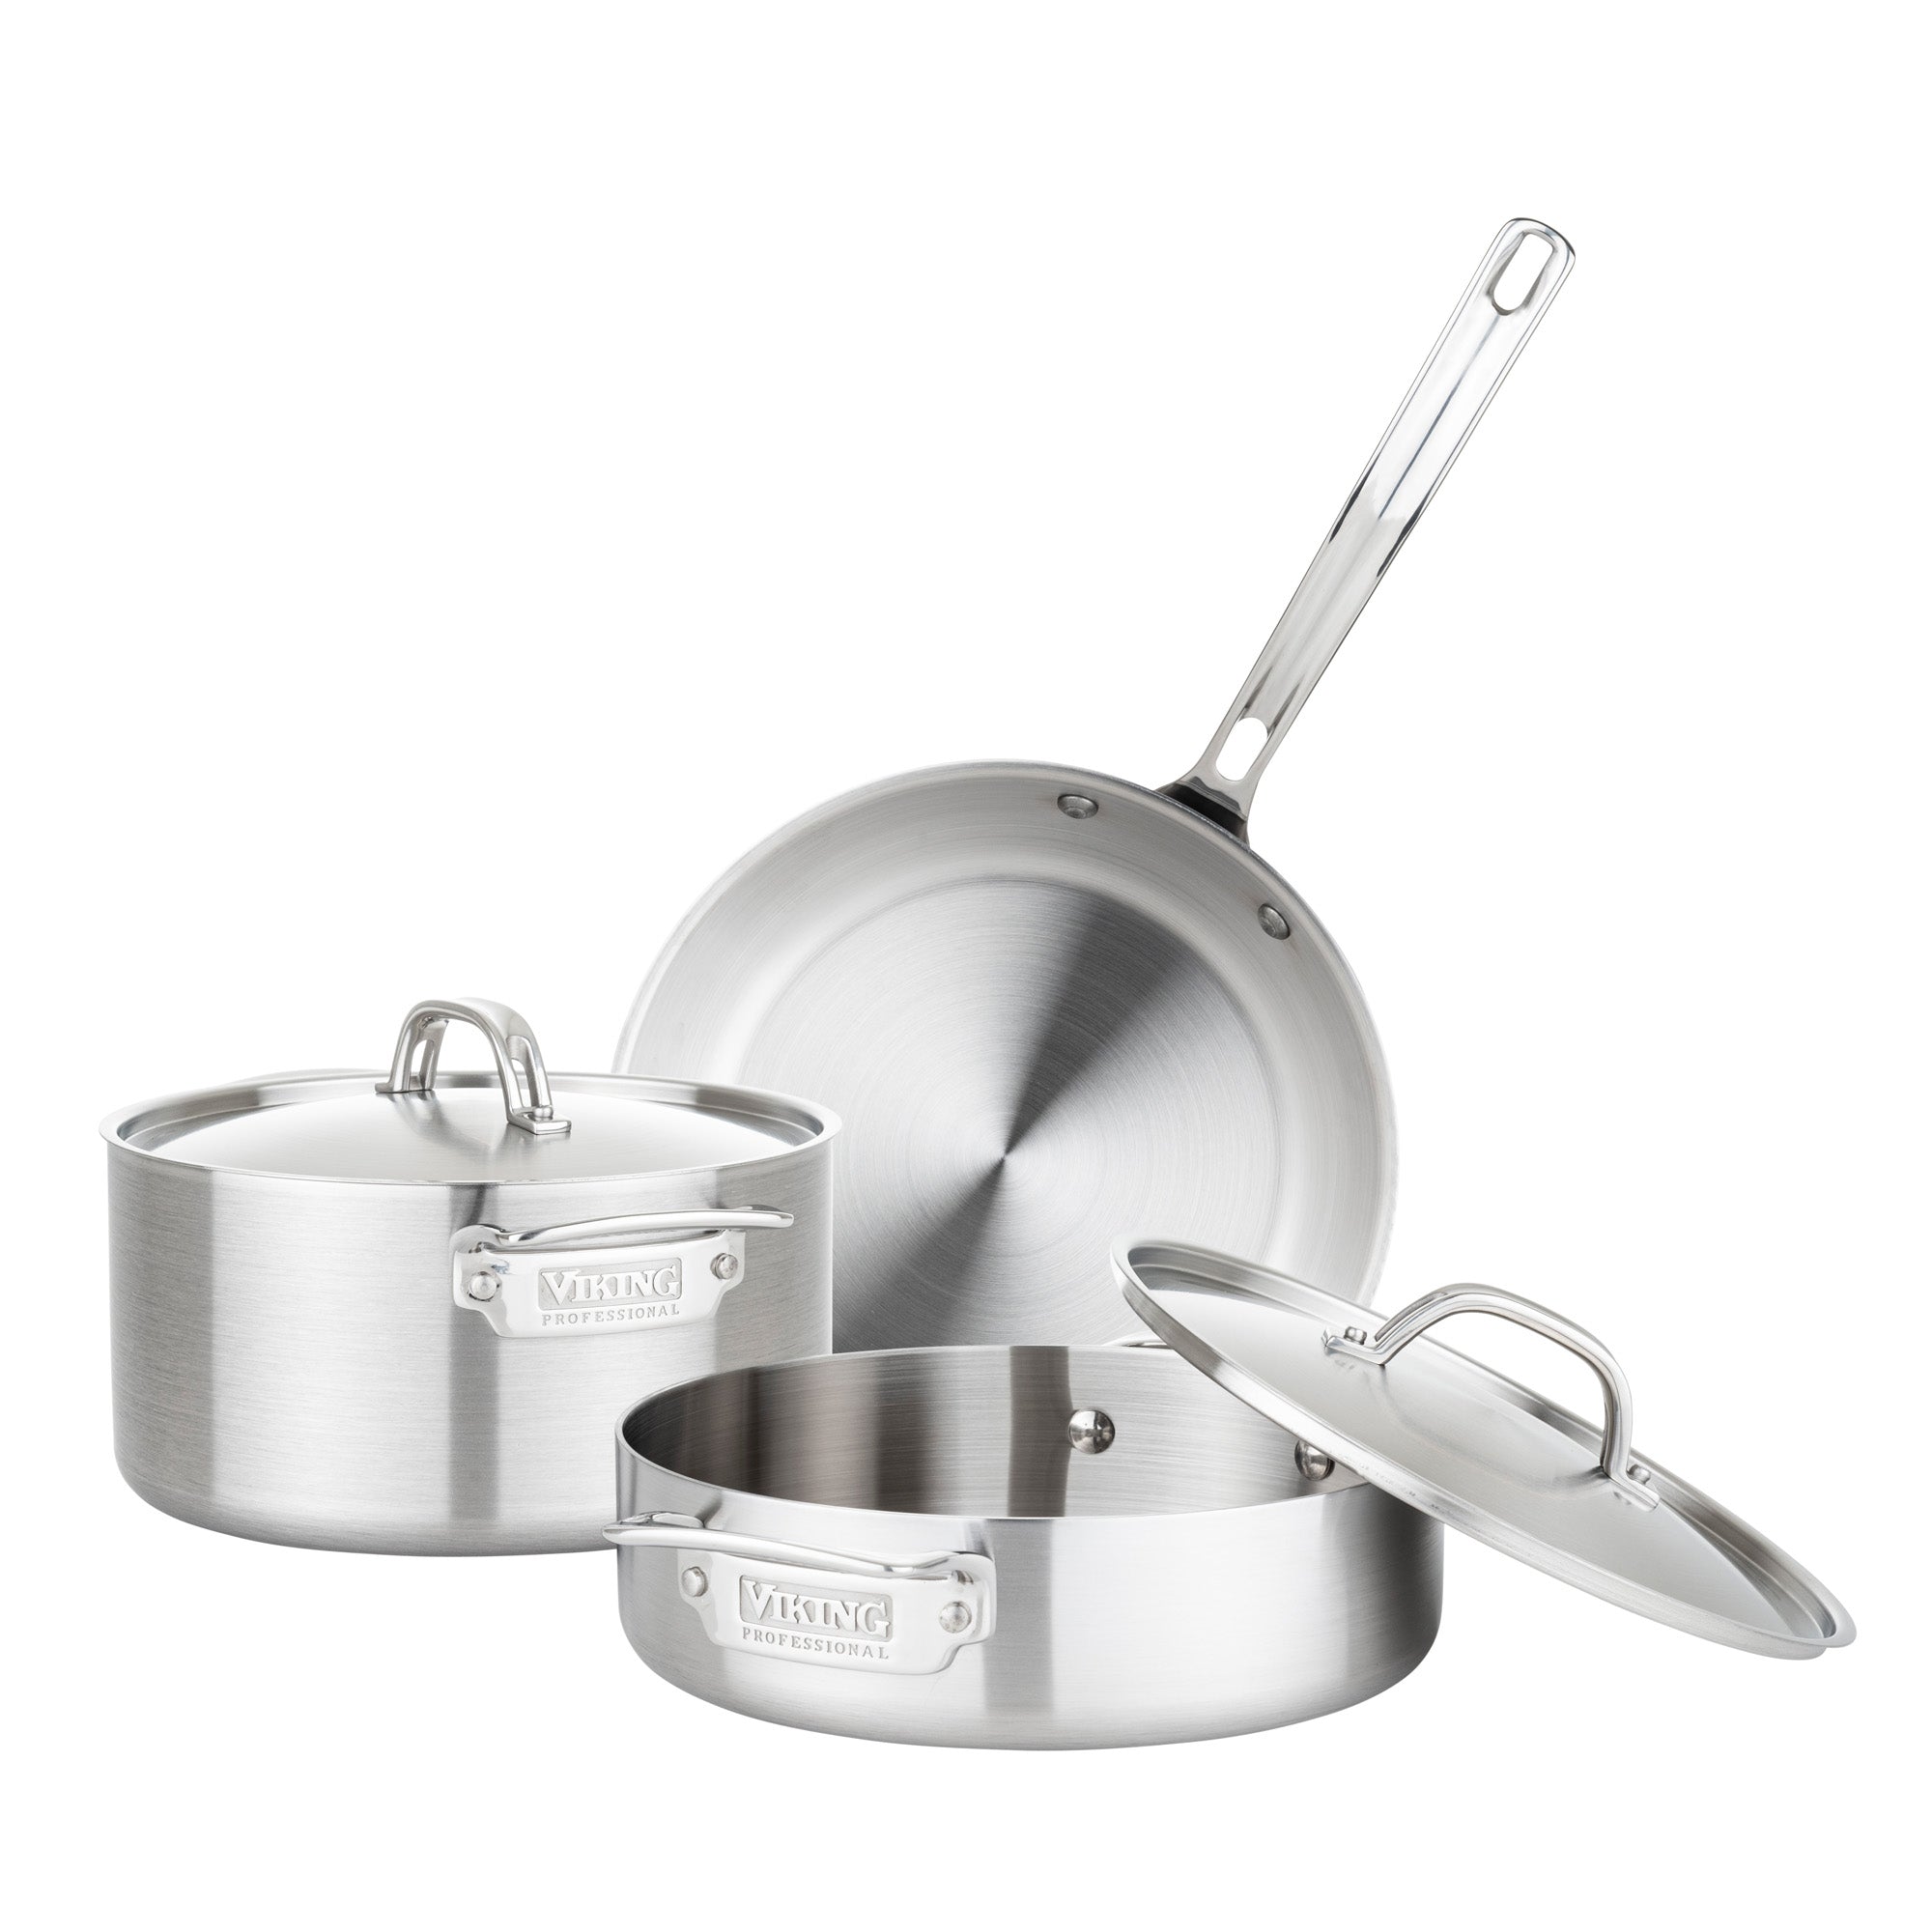 Signature Stainless Steel 5-Piece Cookware Set